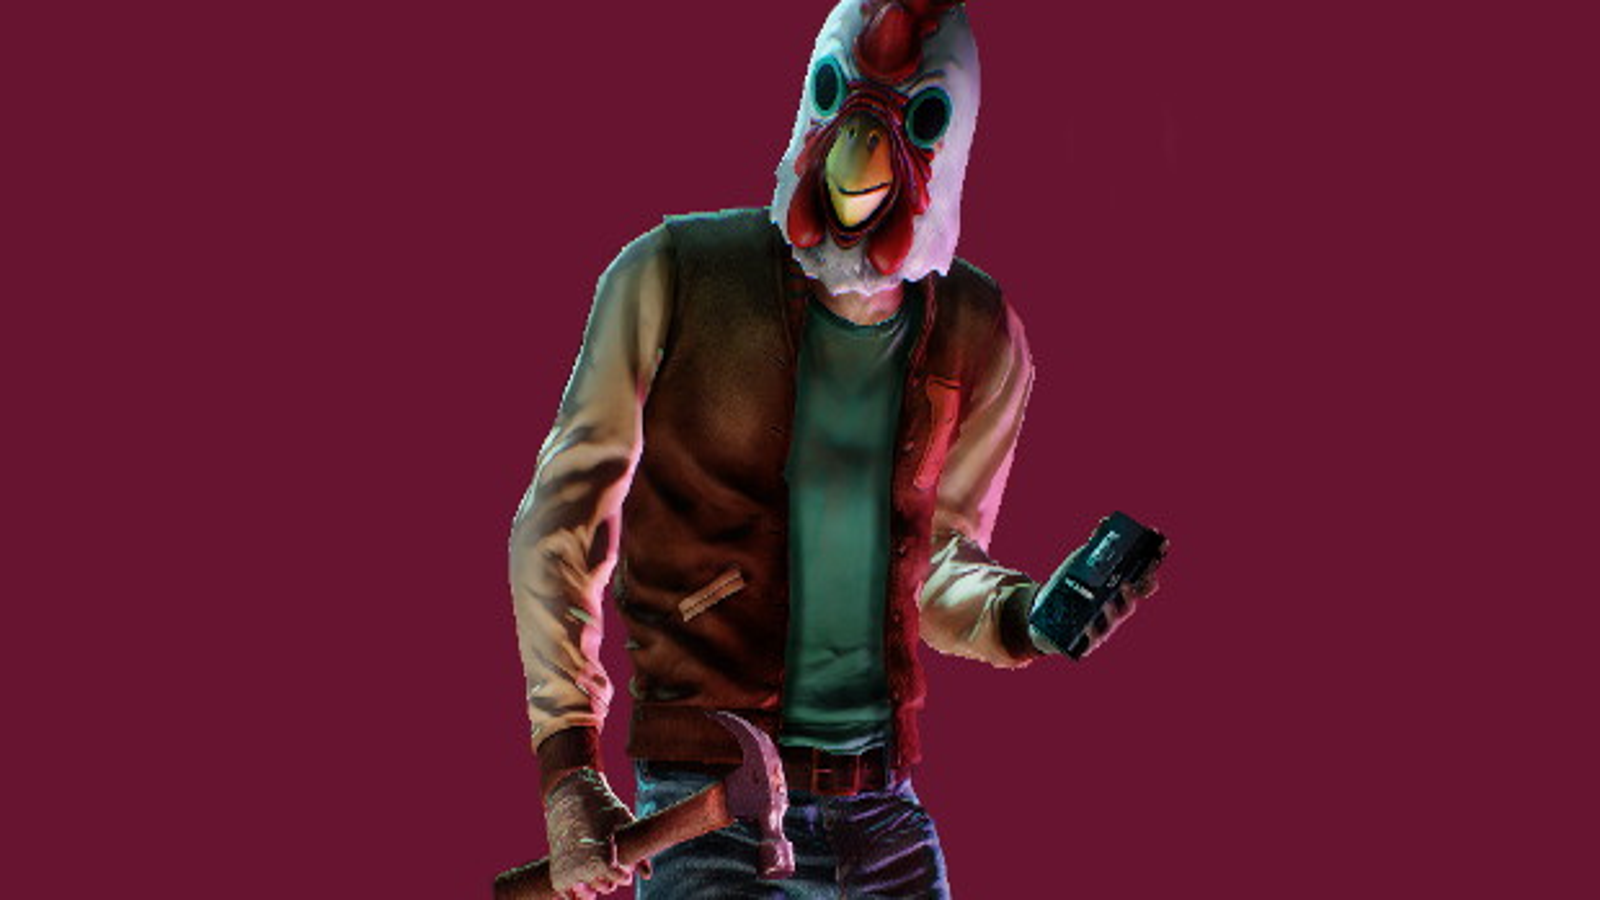 The jacket payday 2 фото 105